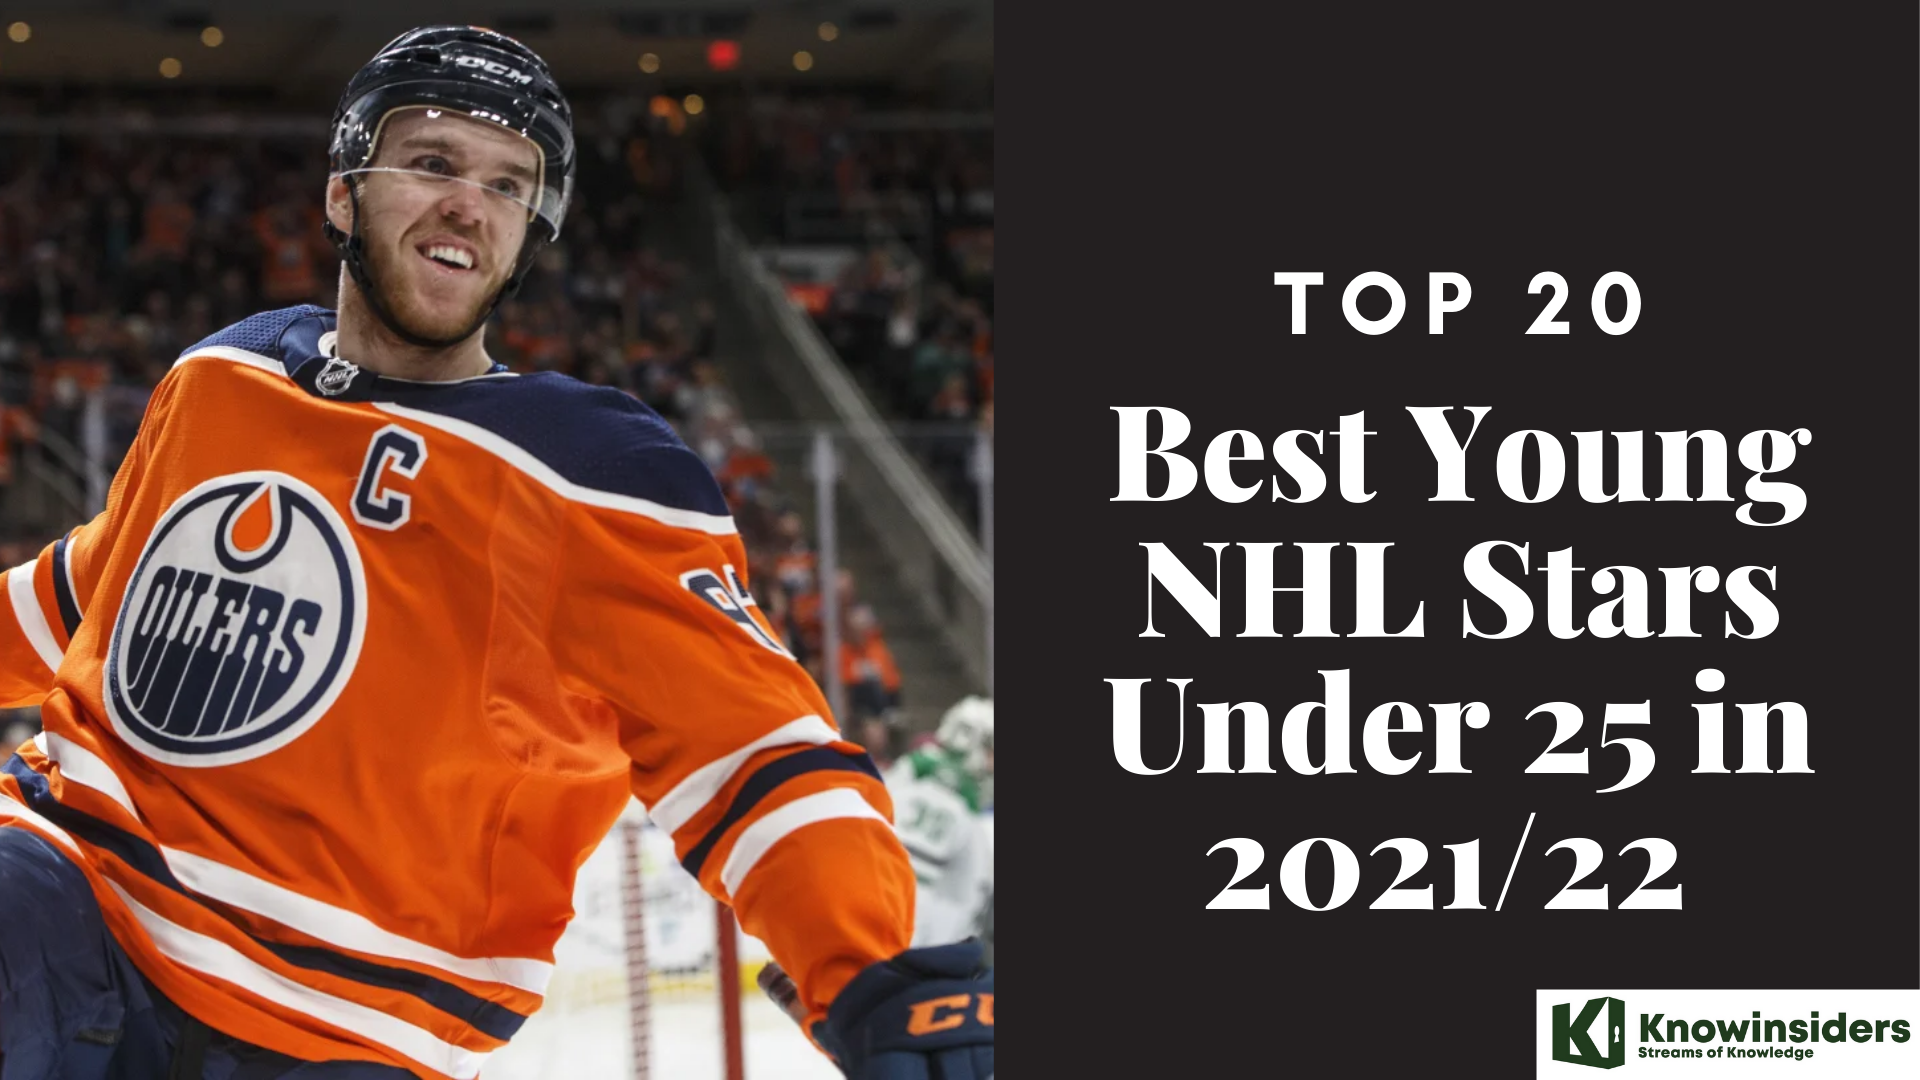 Top 20 Best Young NHL Stars